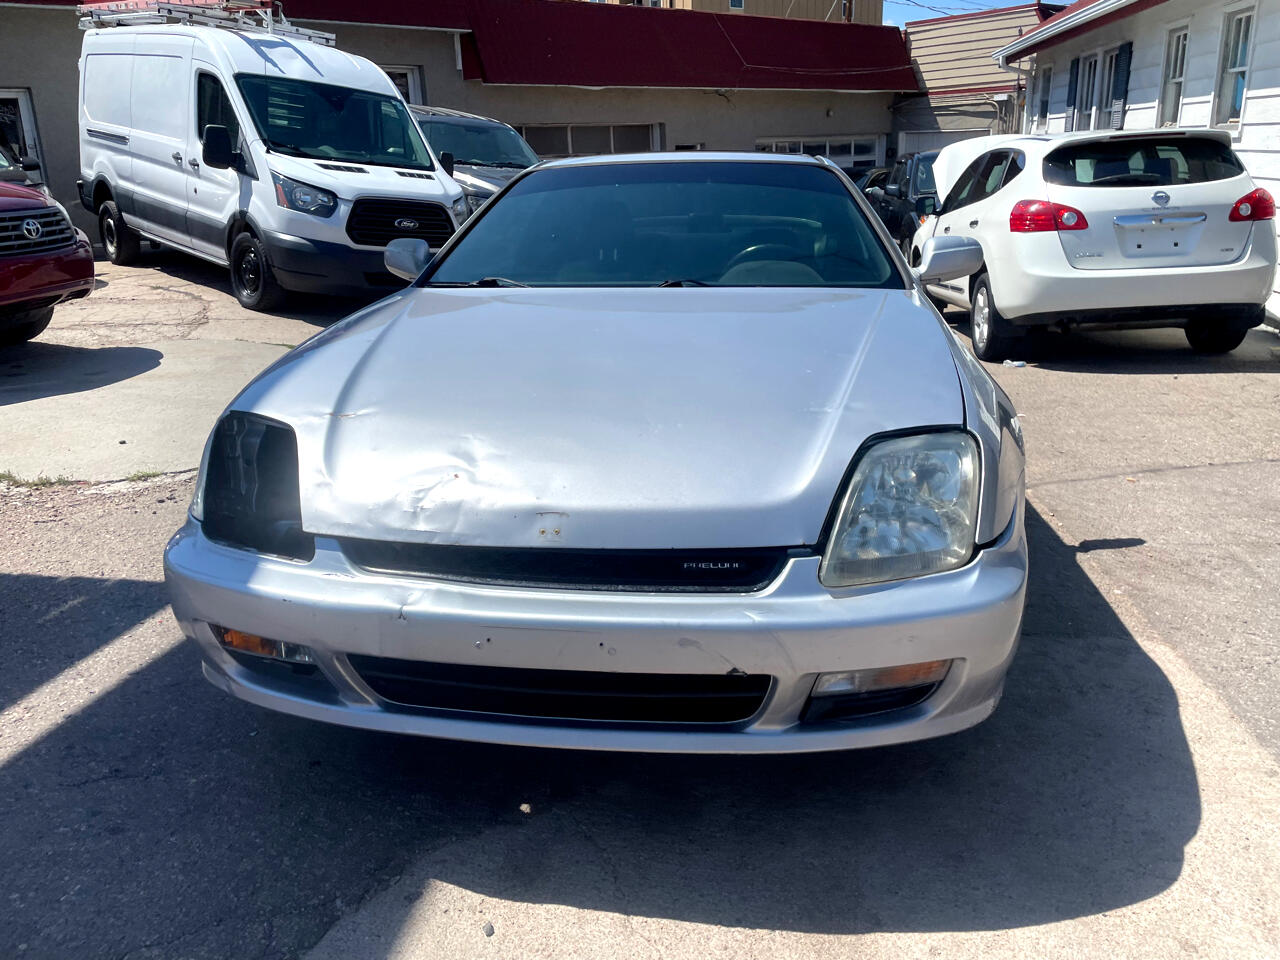 Used 2001 Honda Prelude  with VIN JHMBB62481C000624 for sale in Denver, CO